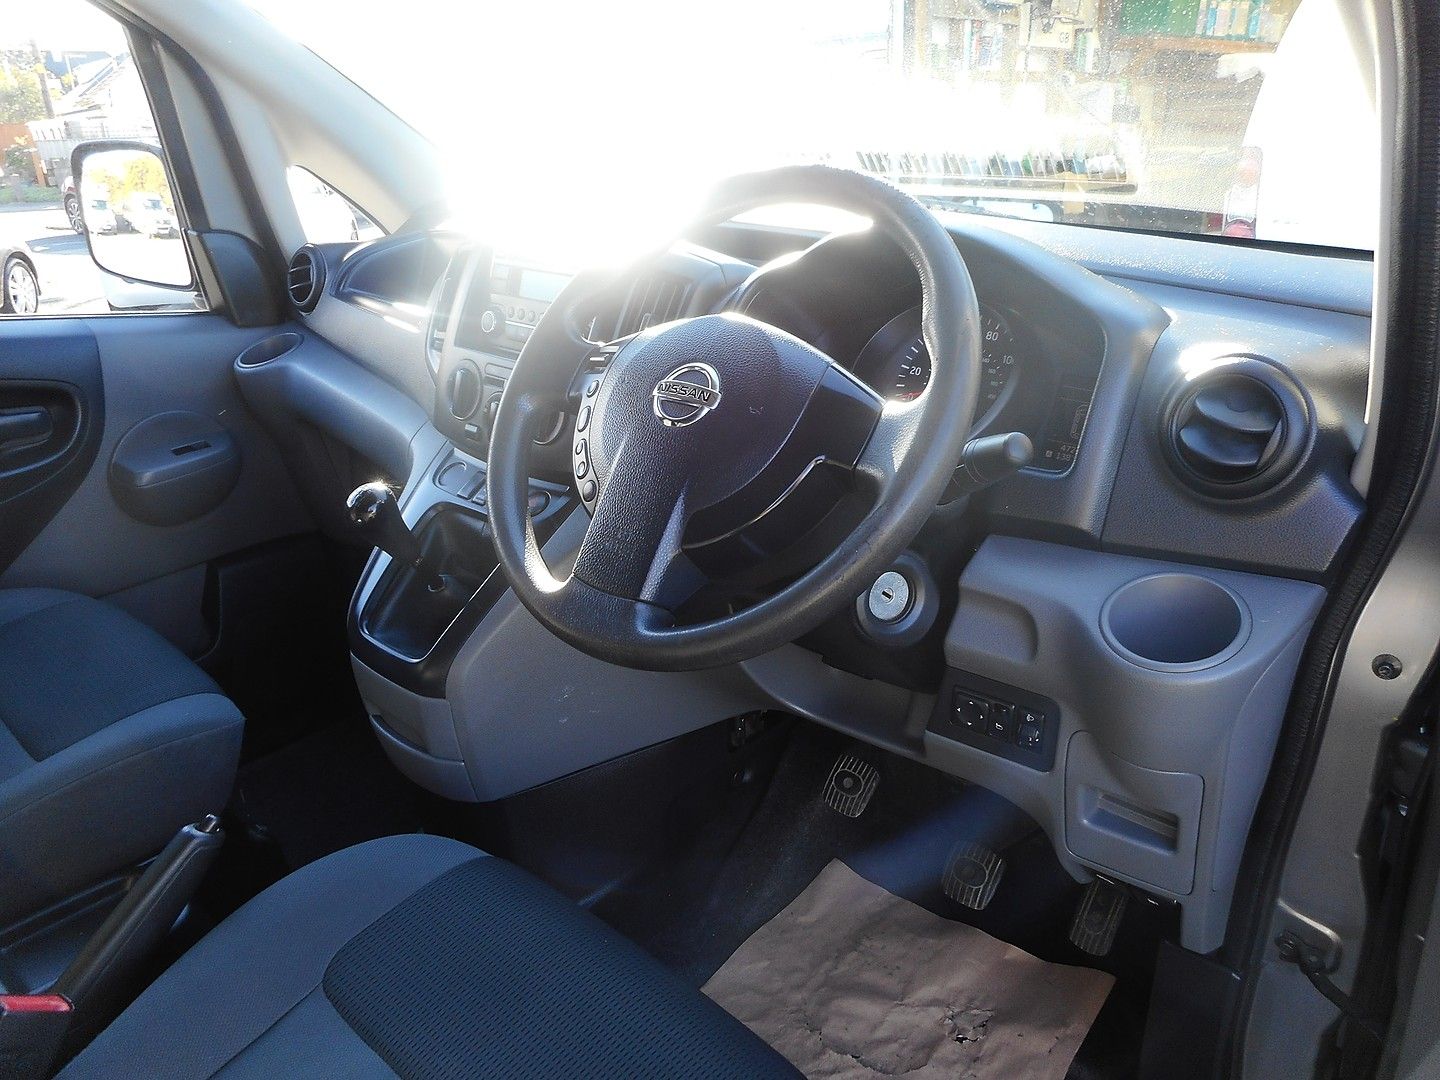 NISSAN NV200 SE 1.5 dCi 89PS (2013) - Picture 9